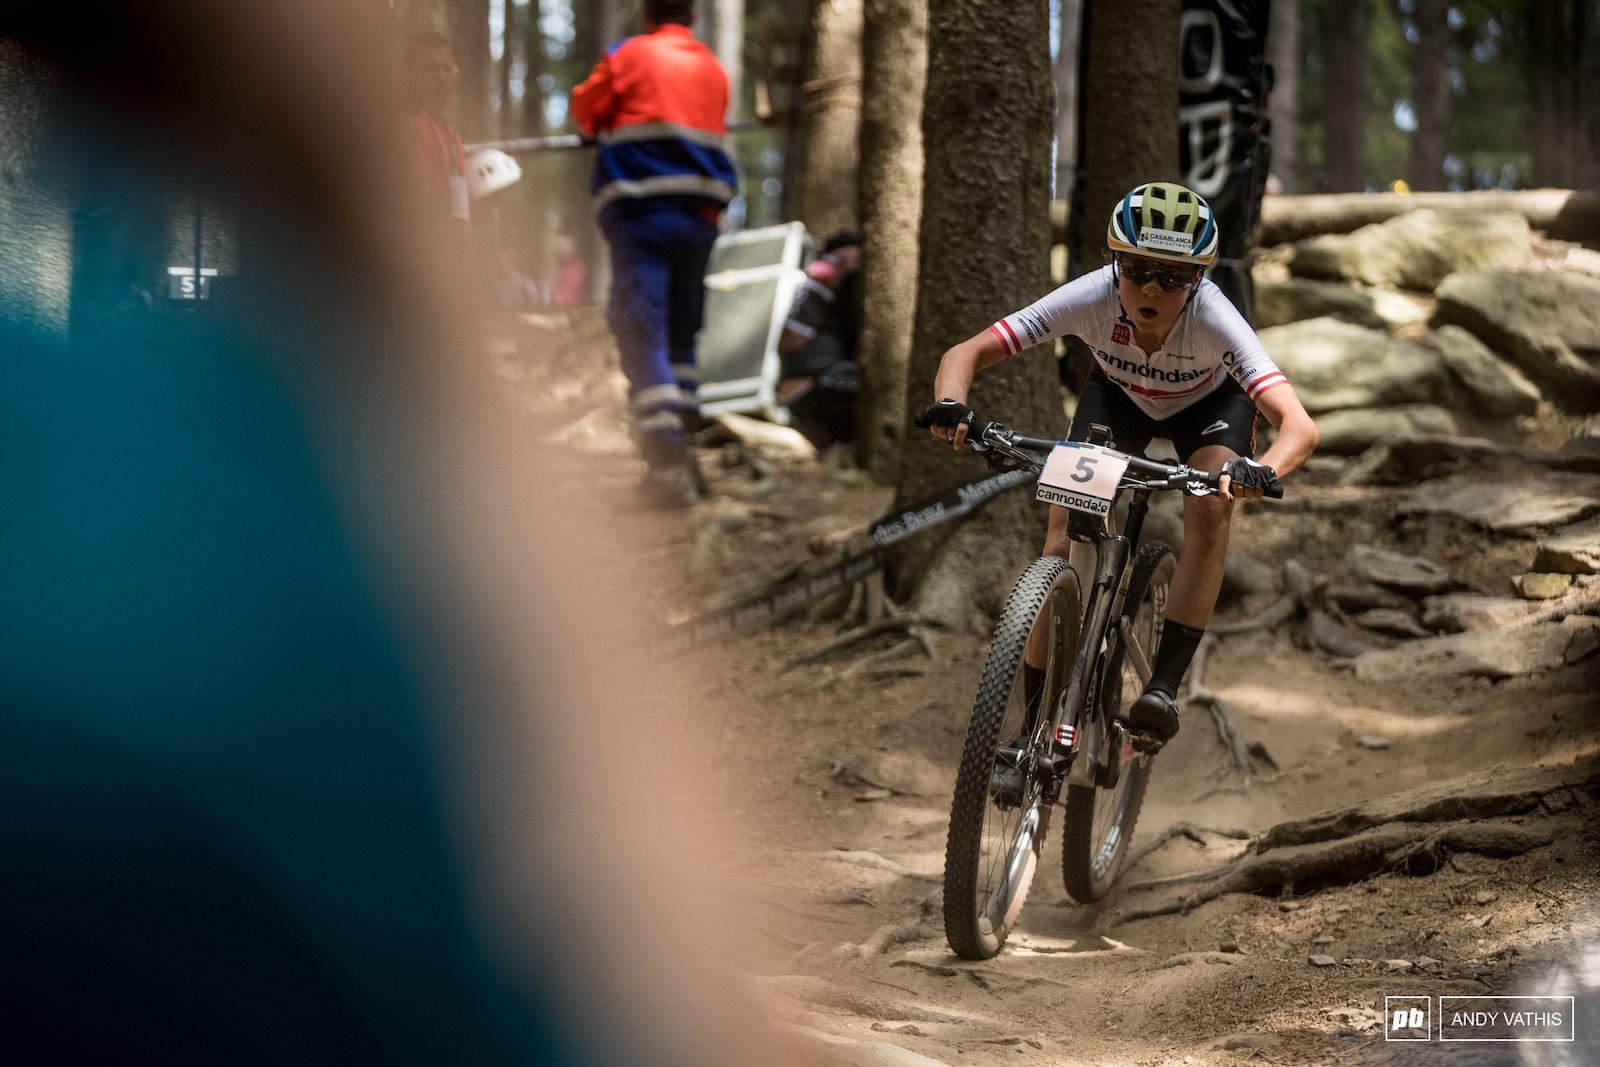 Mona Mitterwalner is showing great strength as her first Elite season unfolds. She d just miss the podium here in Nove Mesto.